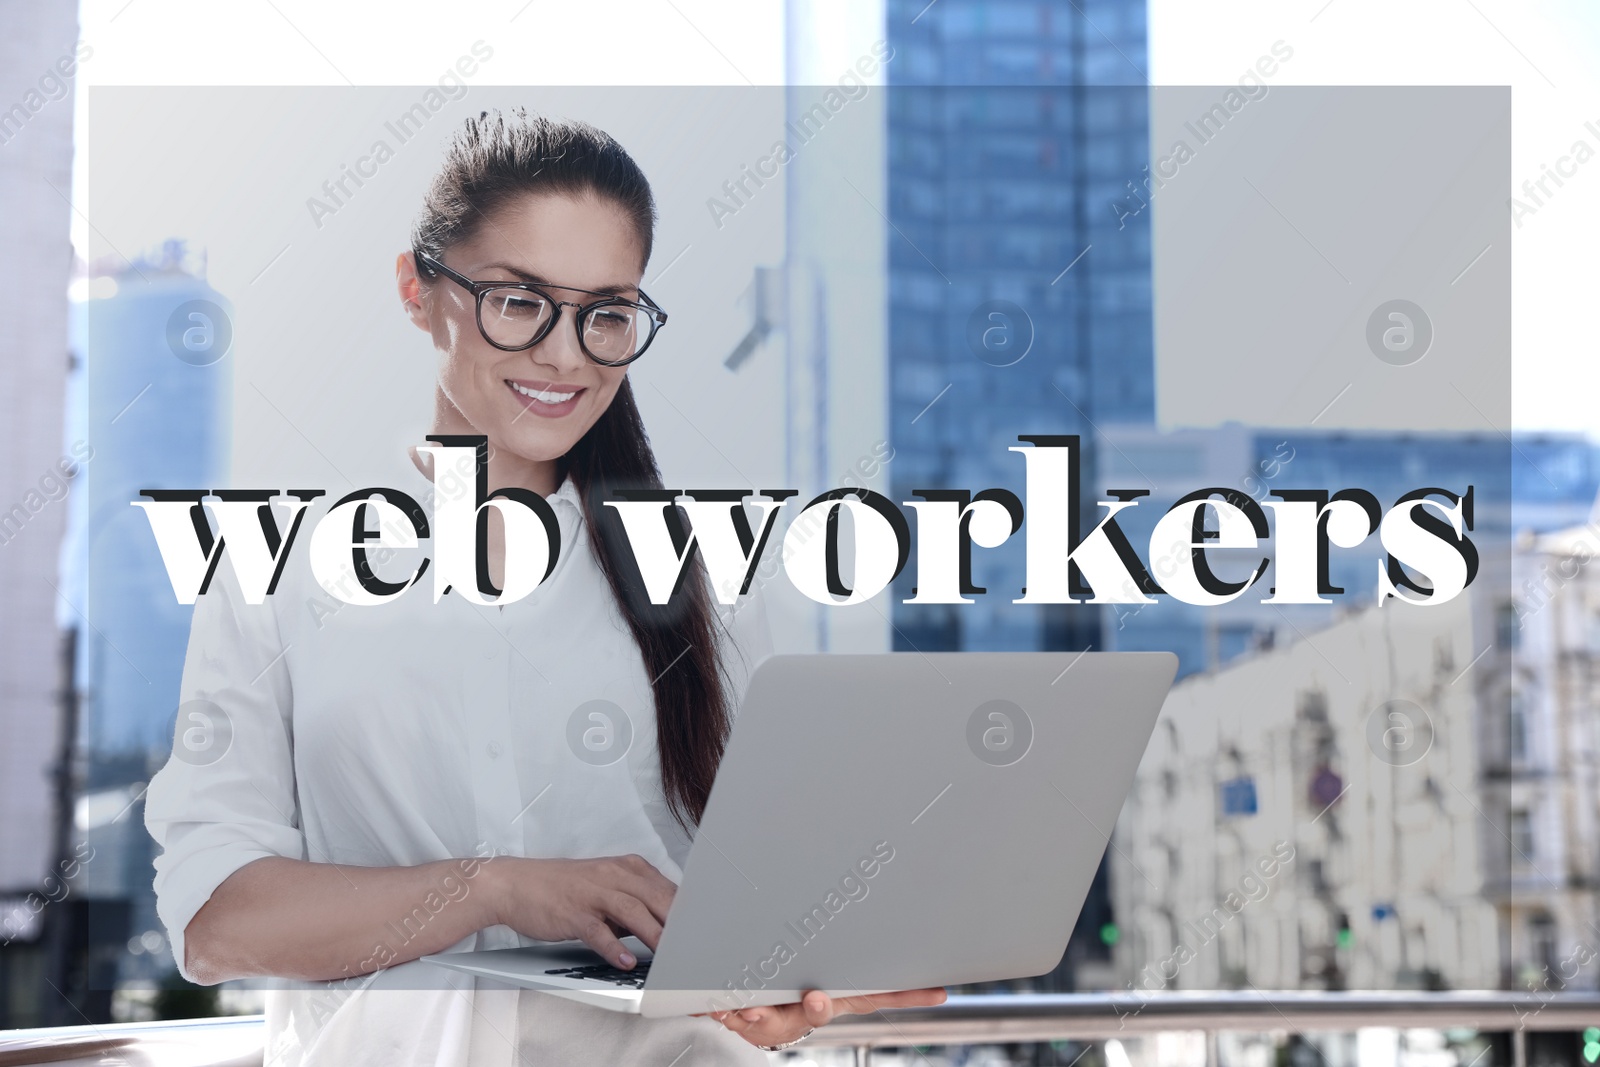 Image of Woman working with laptop outdoors. Web workers